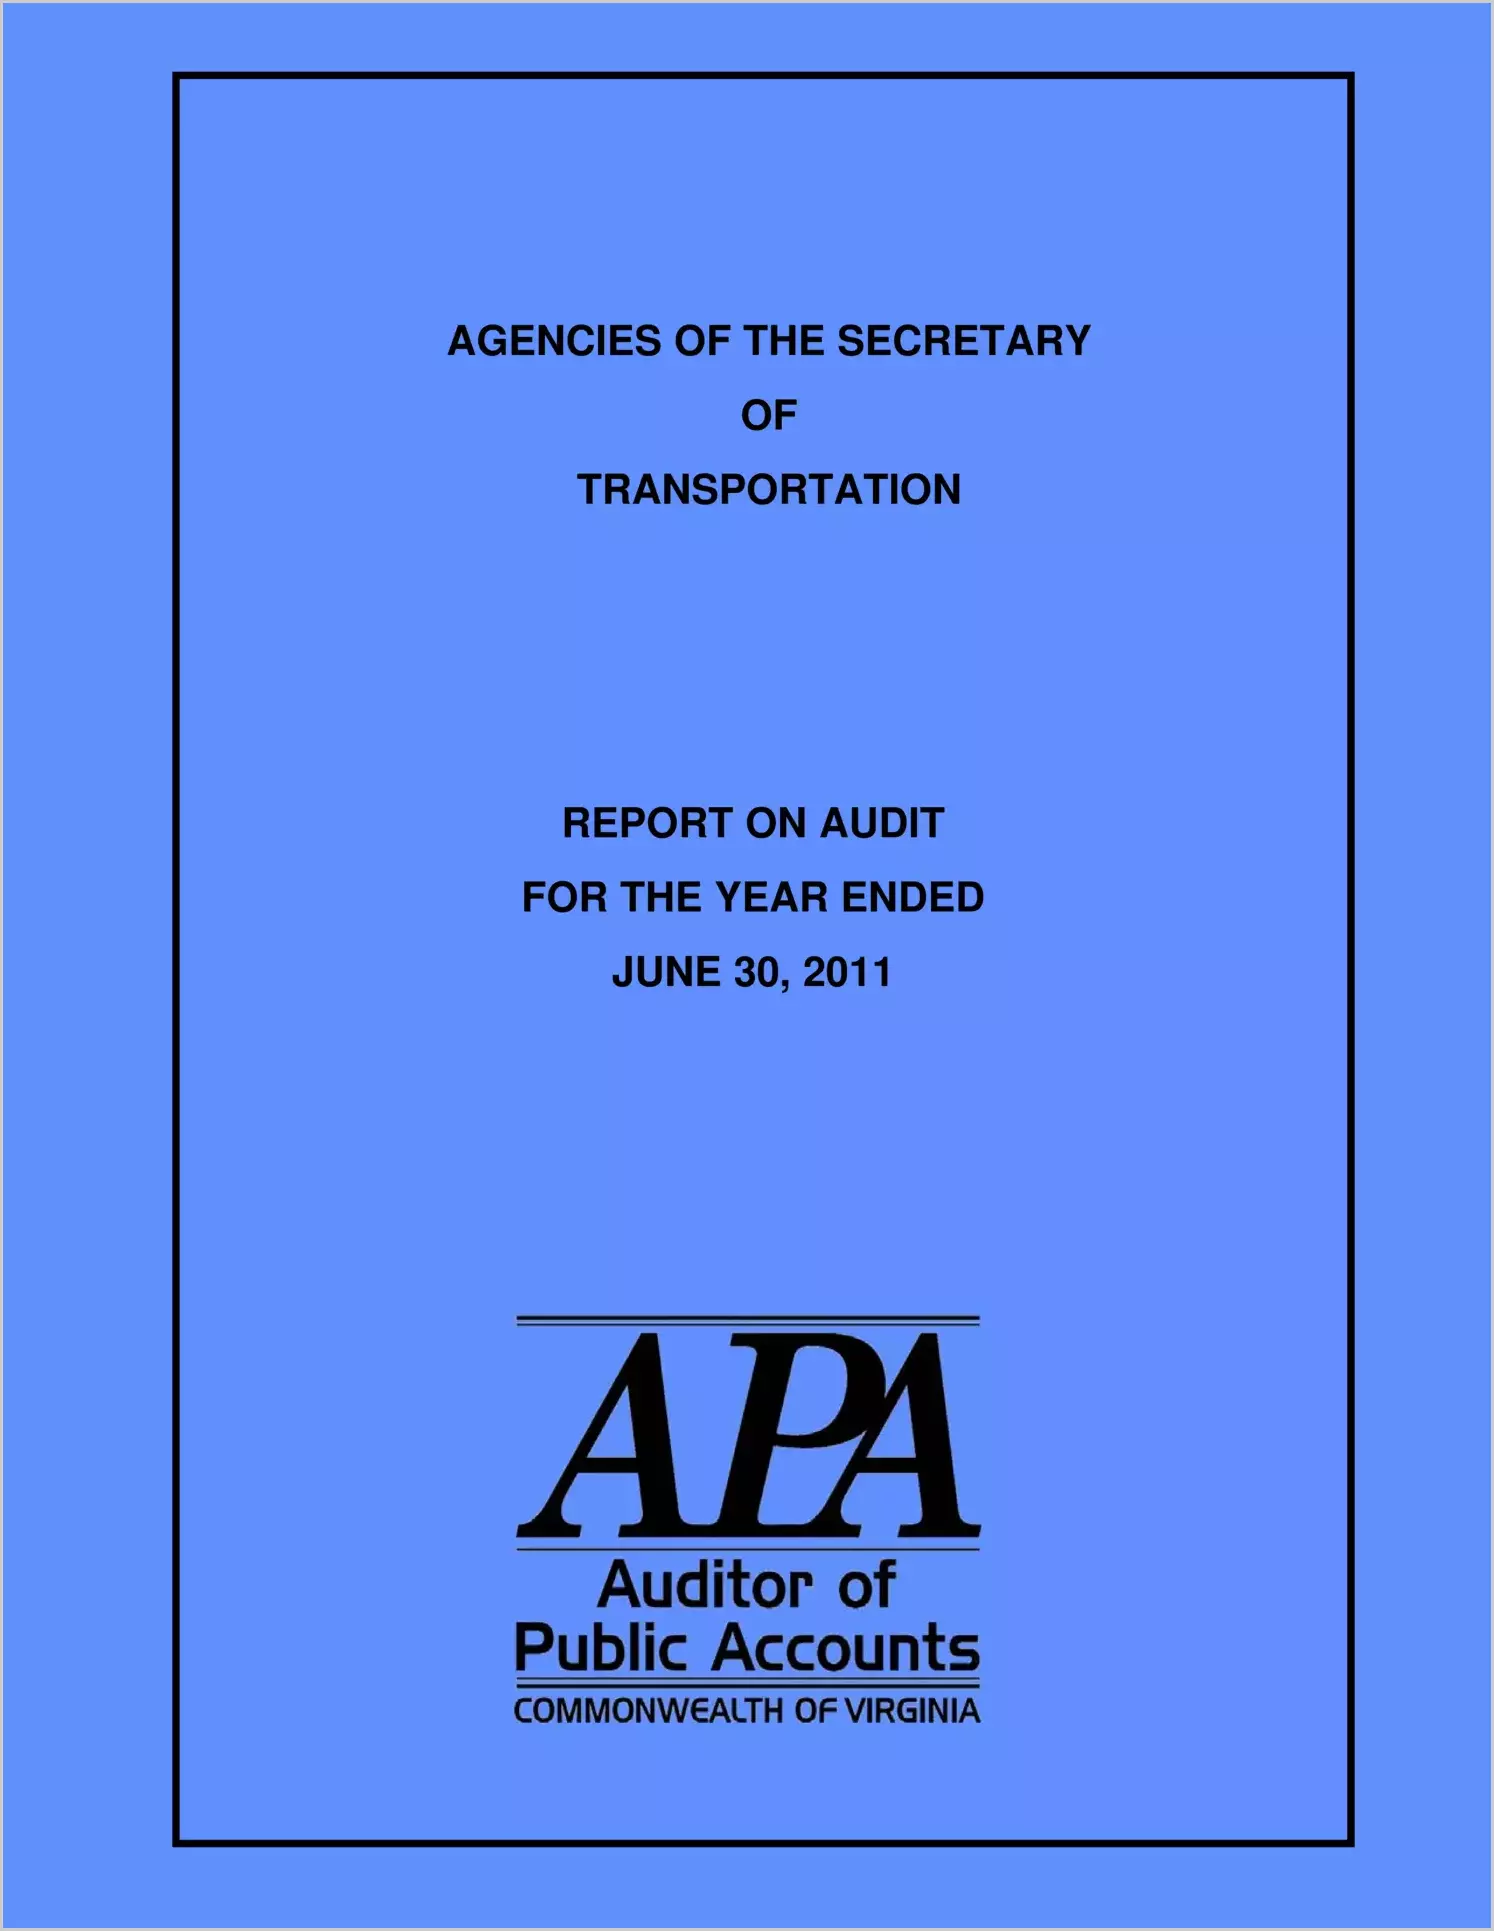 Agencies of the Secretary of Transportation for the year ended June 30, 2011